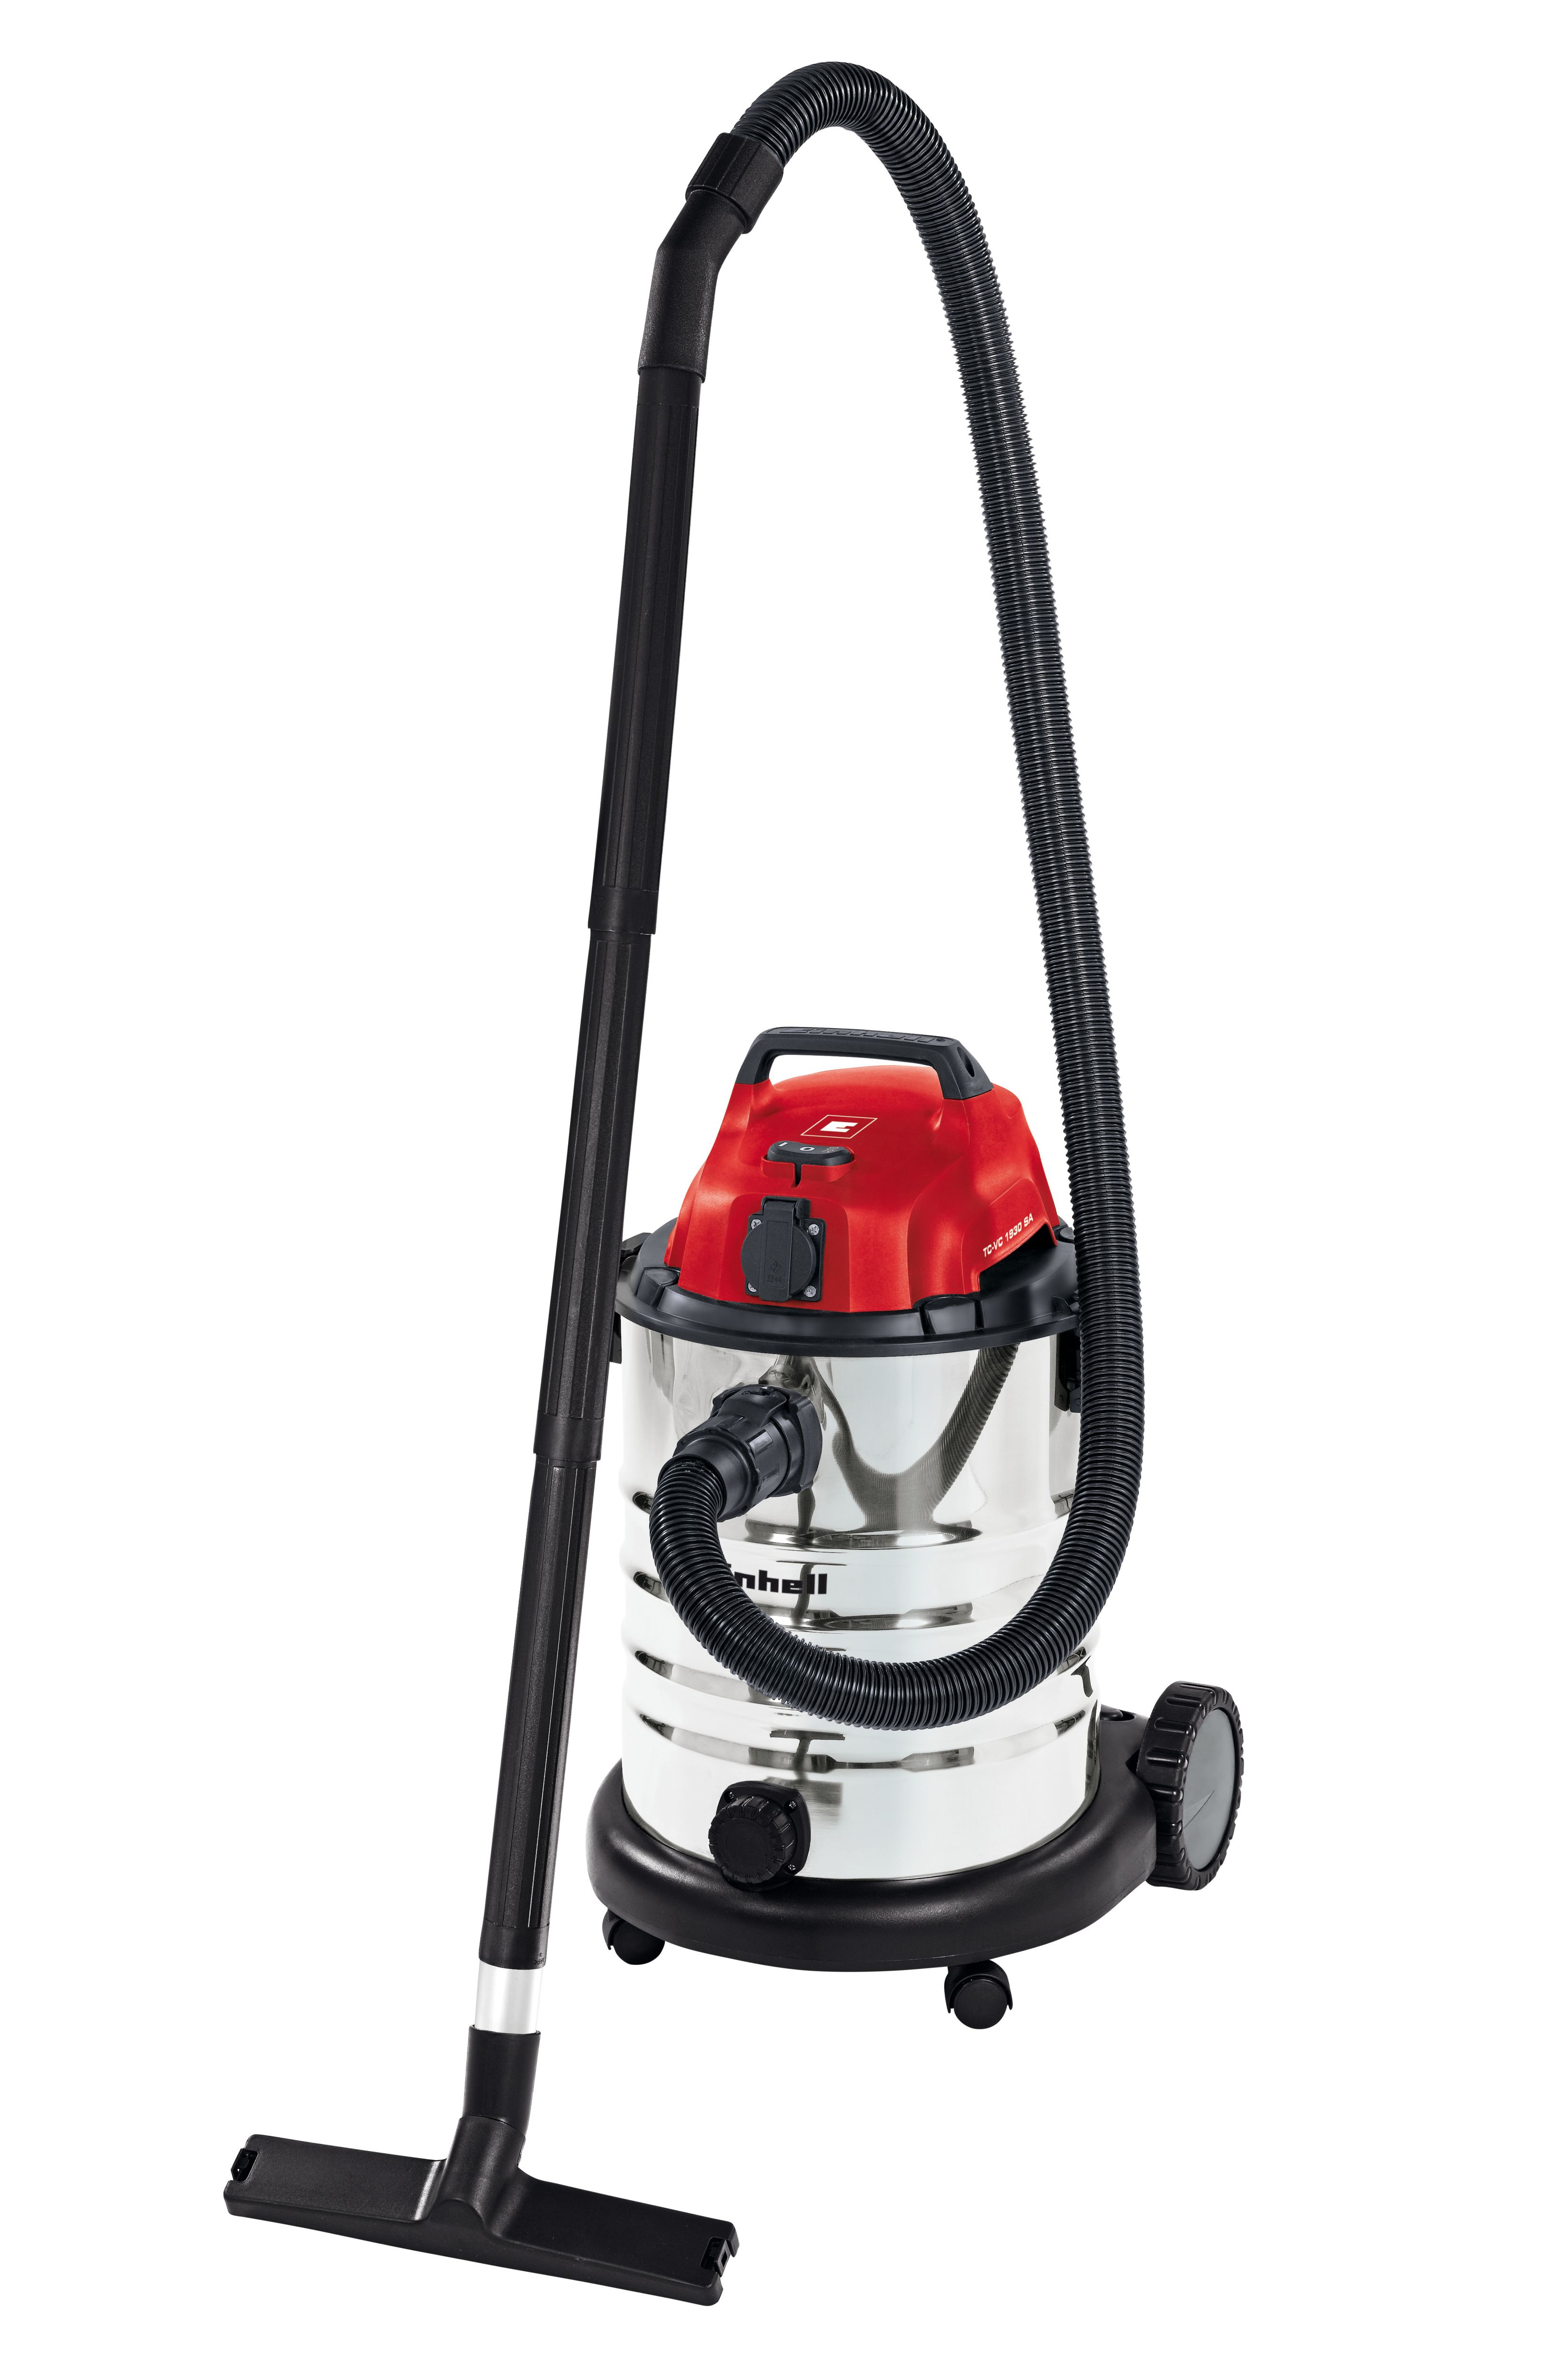 Image of Einhell TE-VC 1930 SA 30L Stainless Steel Wet & Dry Vac with Power Take Off - 1500W